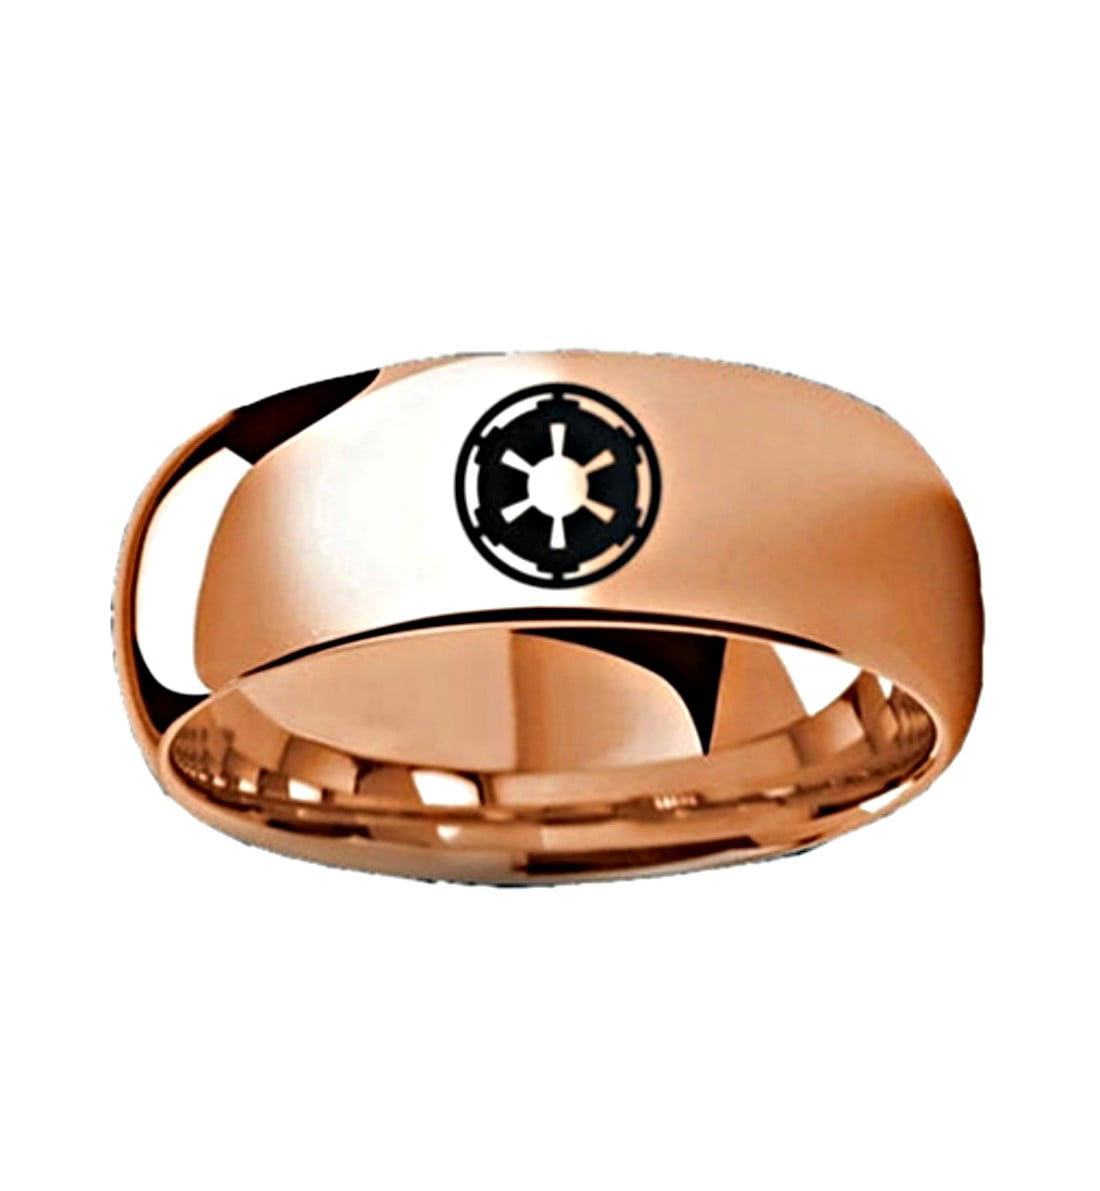 Thorsten Star Wars Sith Imperial Symbol Design Ring Polished Rose Gold Plated Tungsten Domed Style Wedding Band 8mm Wide from Roy Rose Jewelry